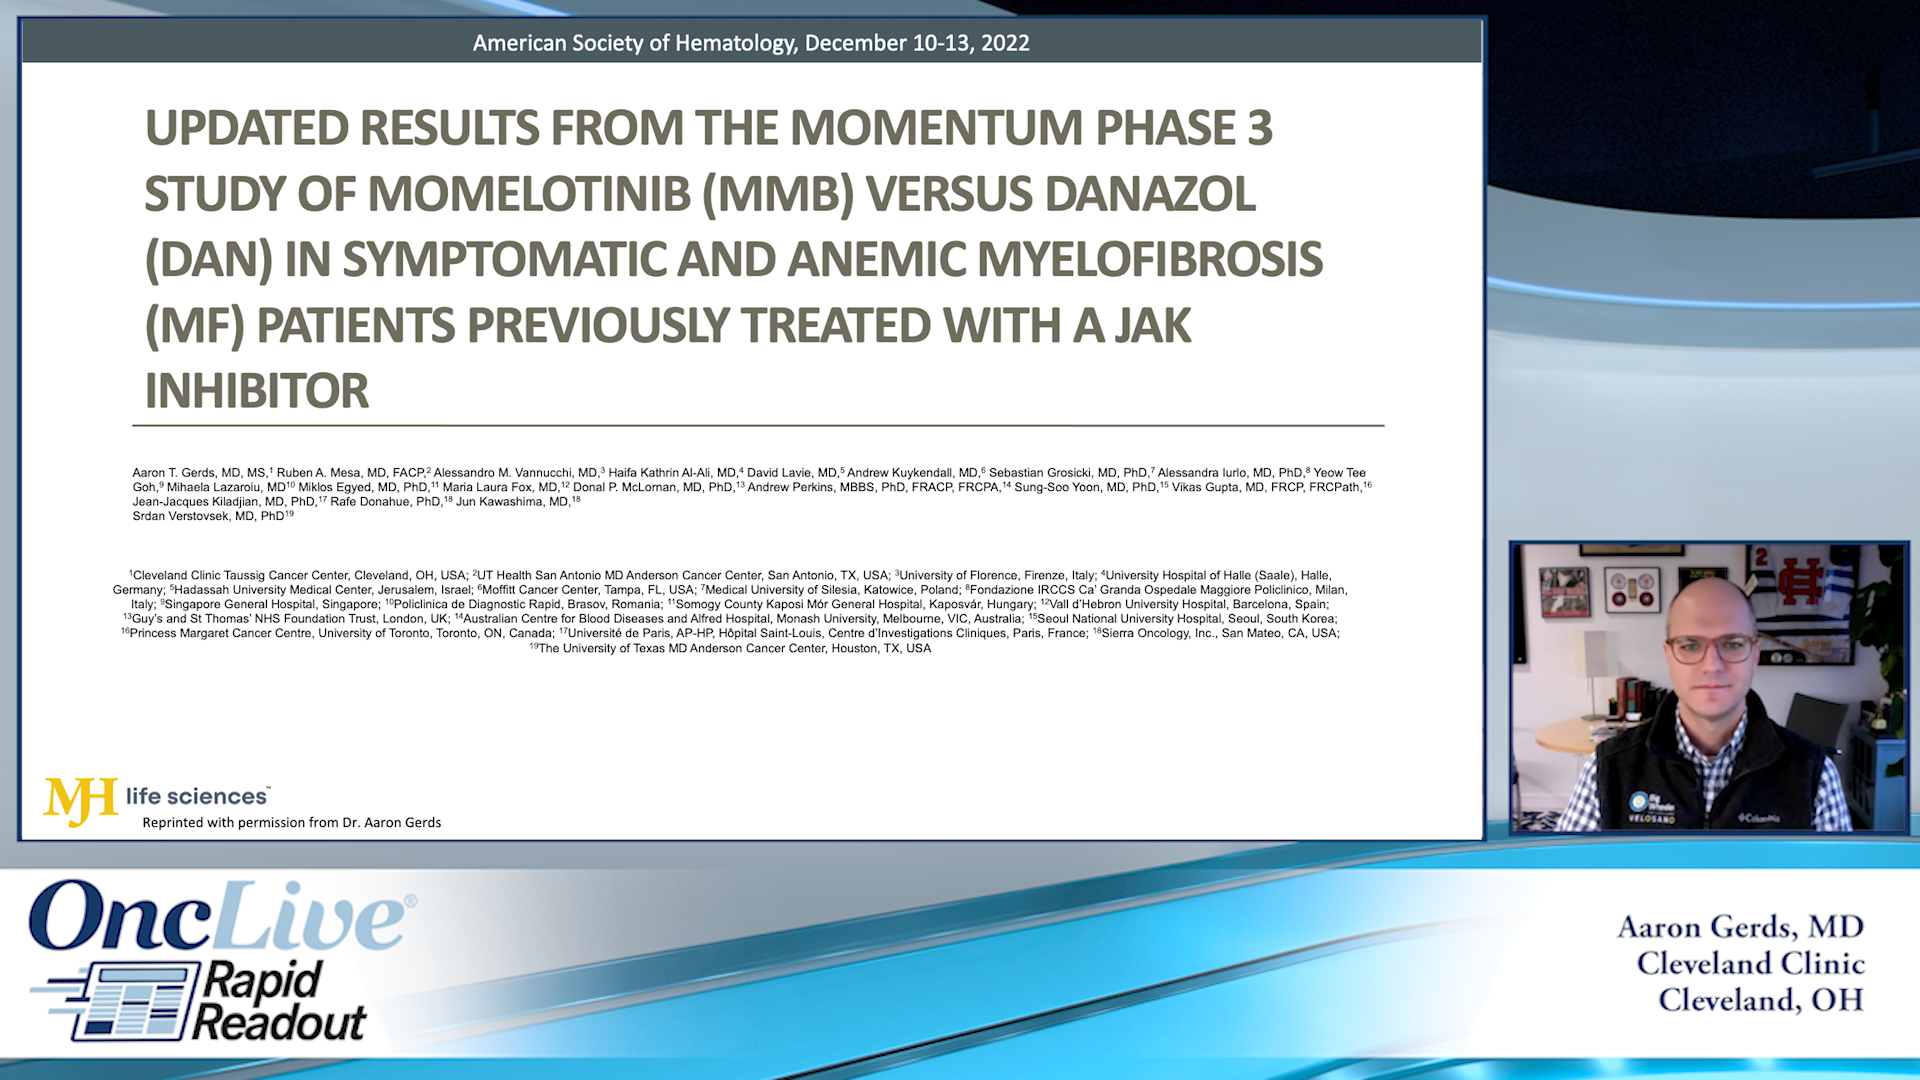 Updated Results from the Momentum Phase 3 Study of Momelotinib (MMB) Versus Danazol (DAN) in Symptomatic and Anemic Myelofibrosis (MF) Patients Previously Treated with a JAK Inhibitor